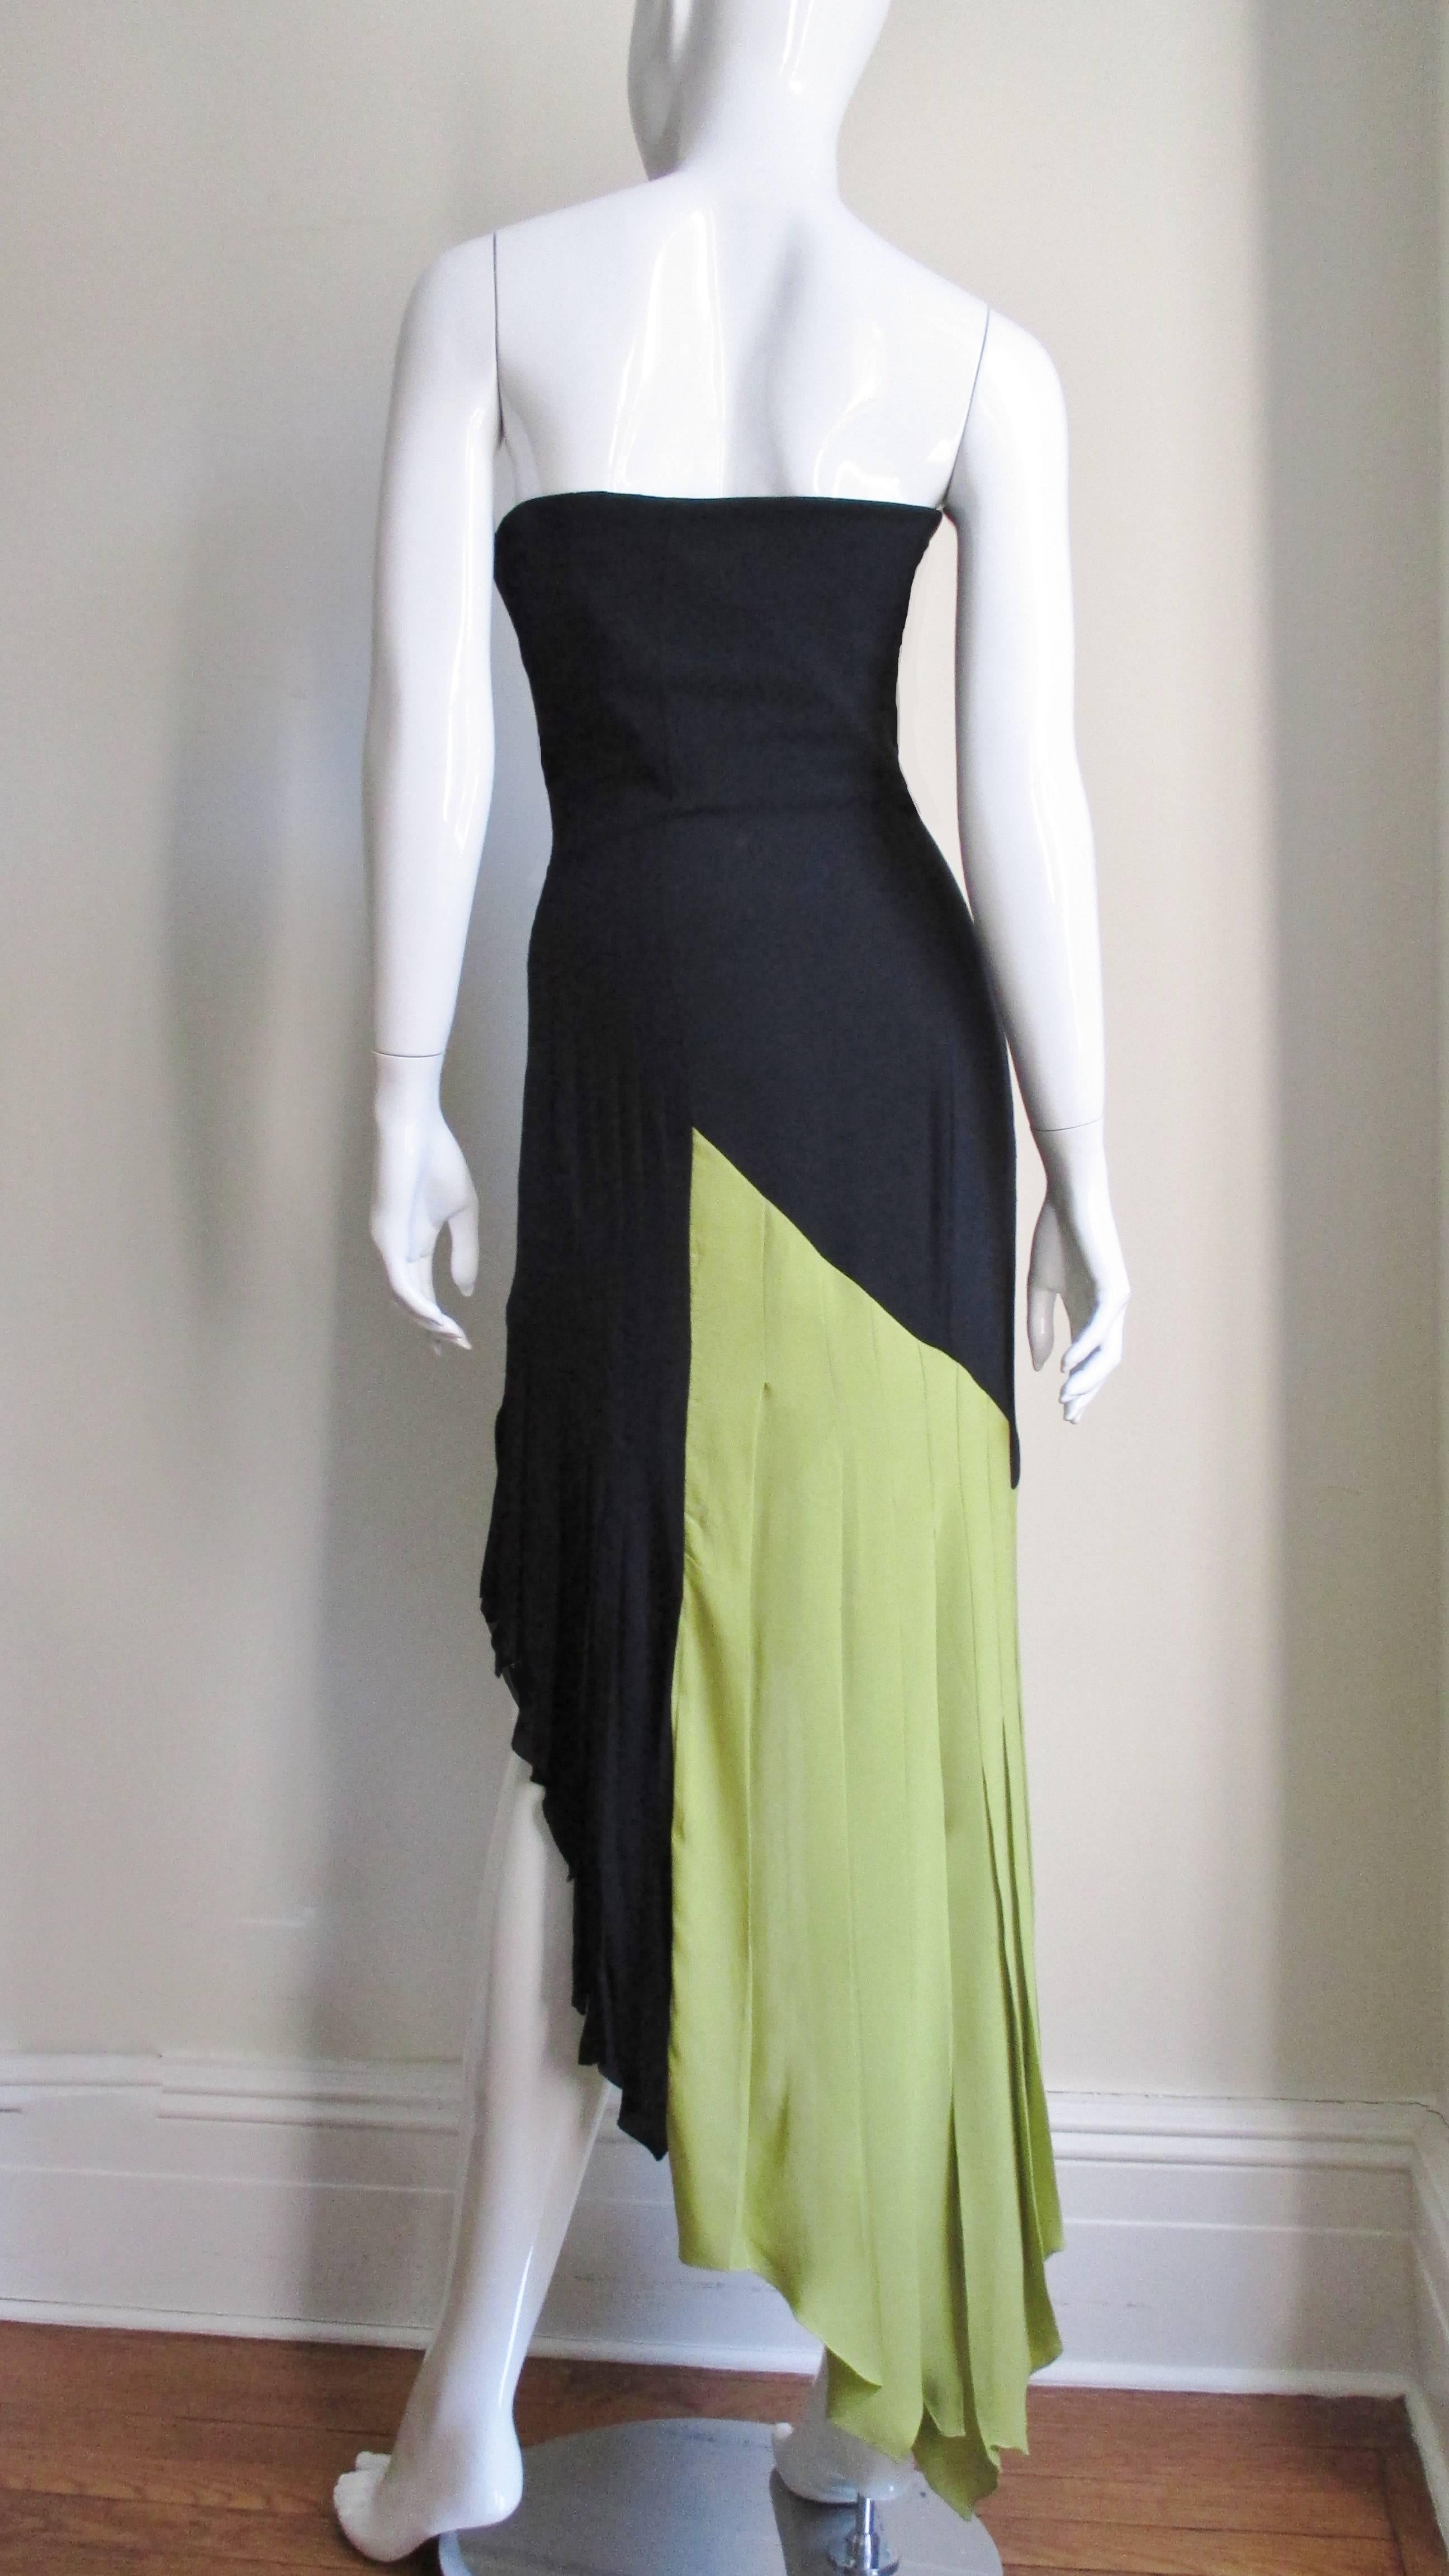 Gianni Versace New Color Block Strapless Dress 1990s For Sale 5